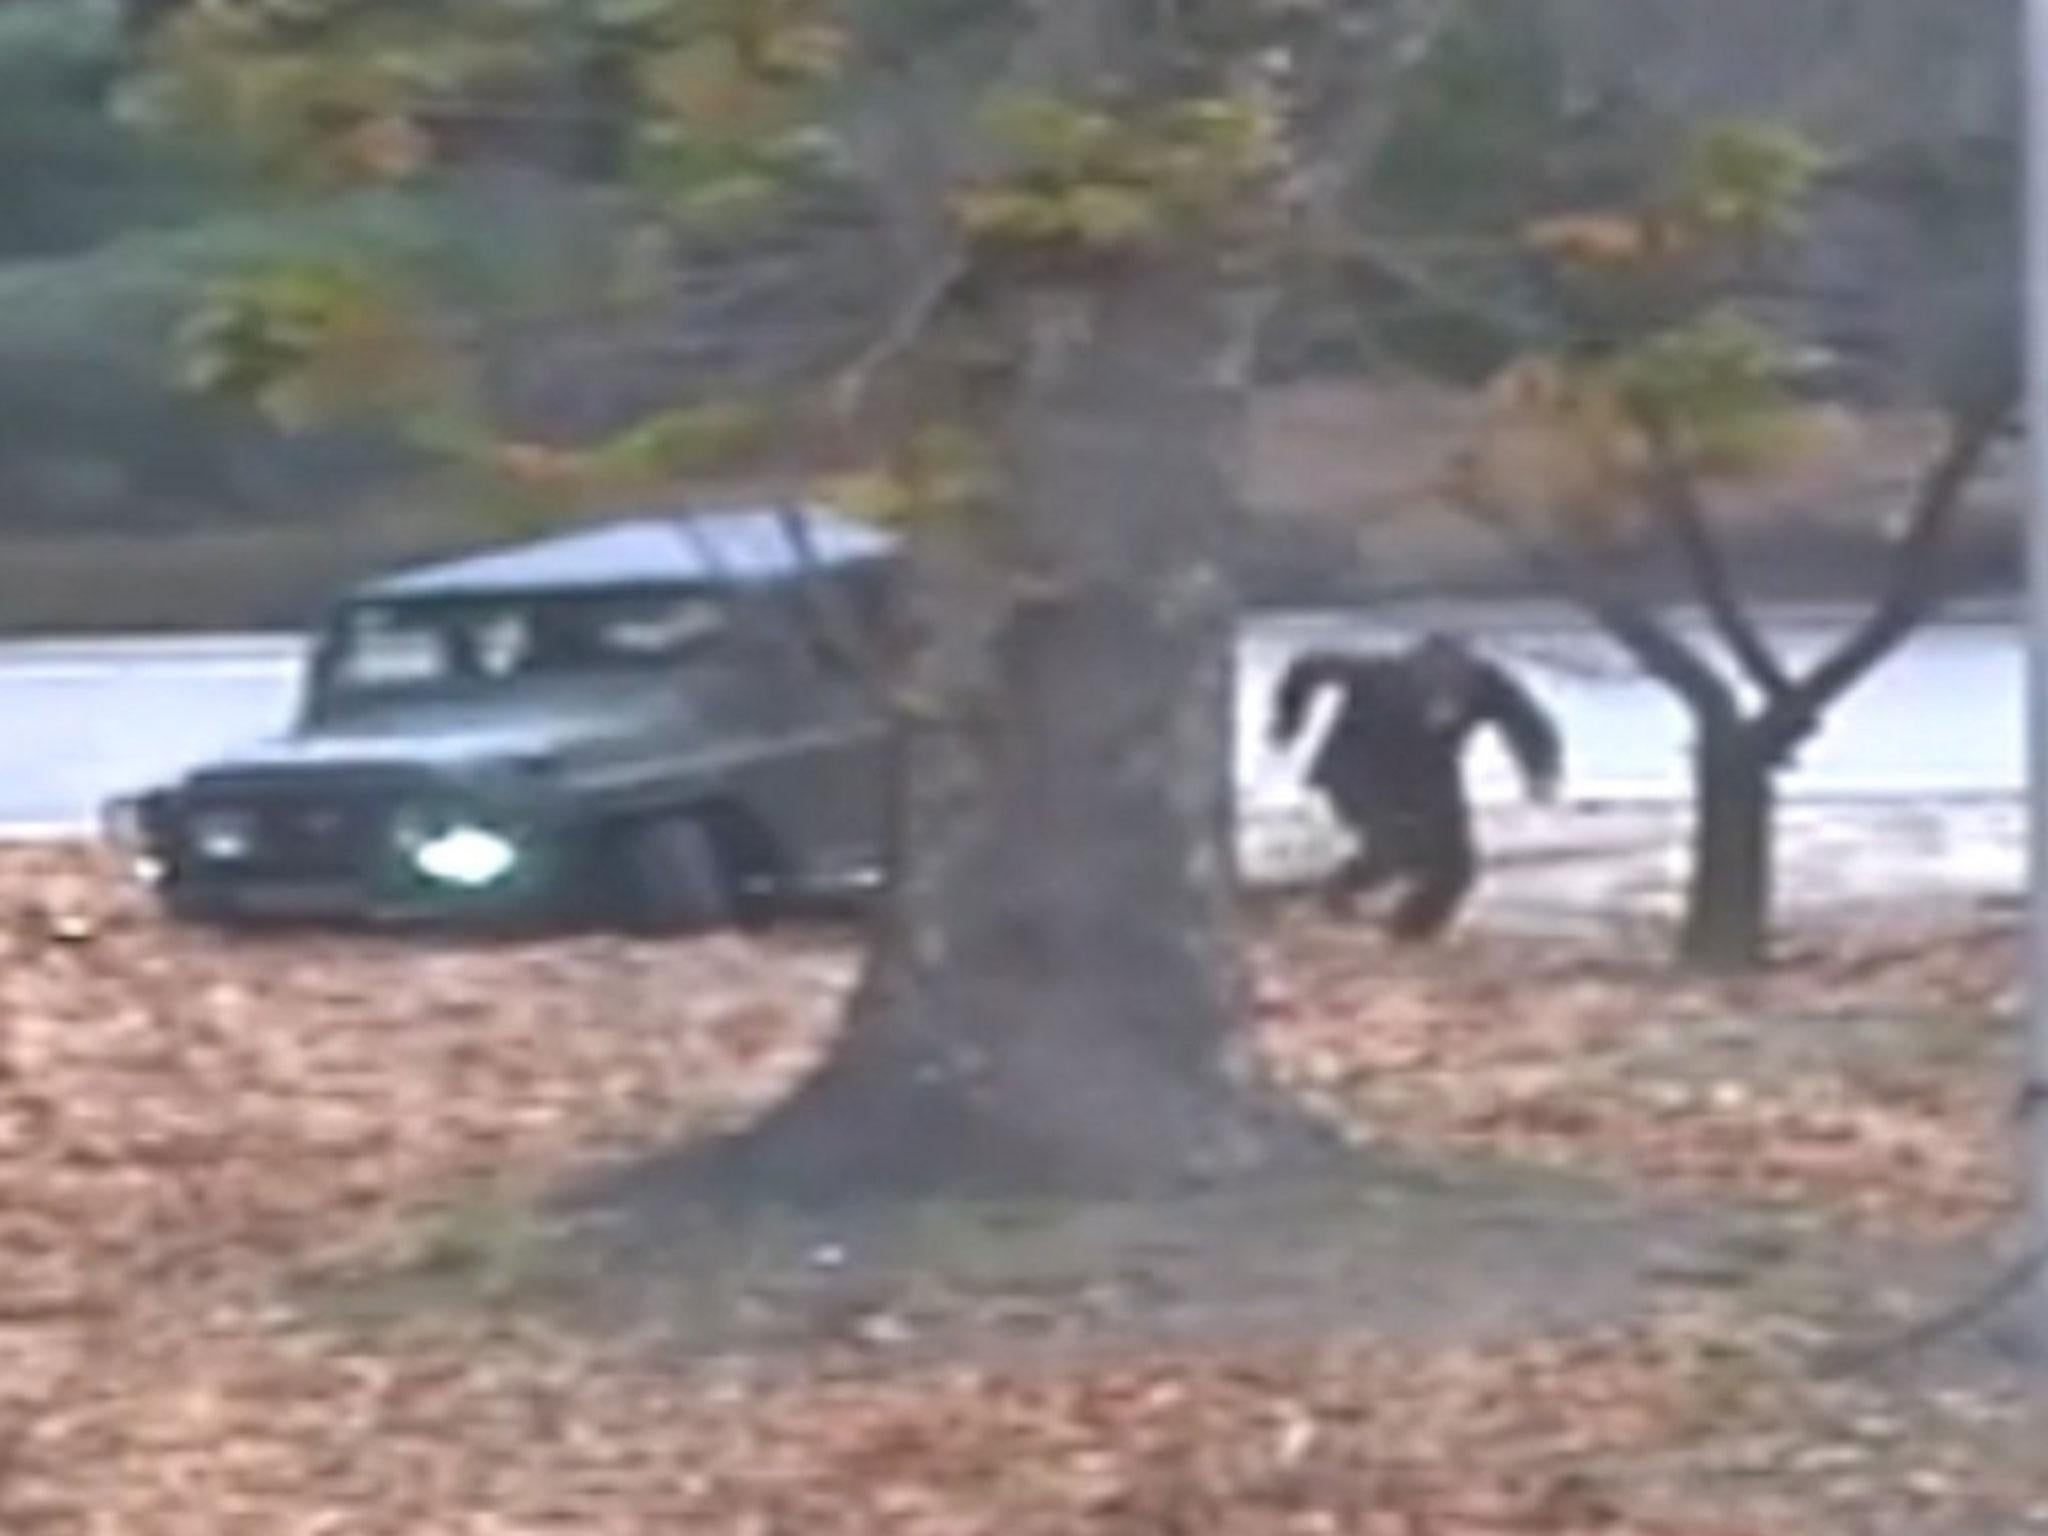 A screen-grab shows the defector running out from a jeep at the Joint Security Area of the Korean Demilitarized Zone